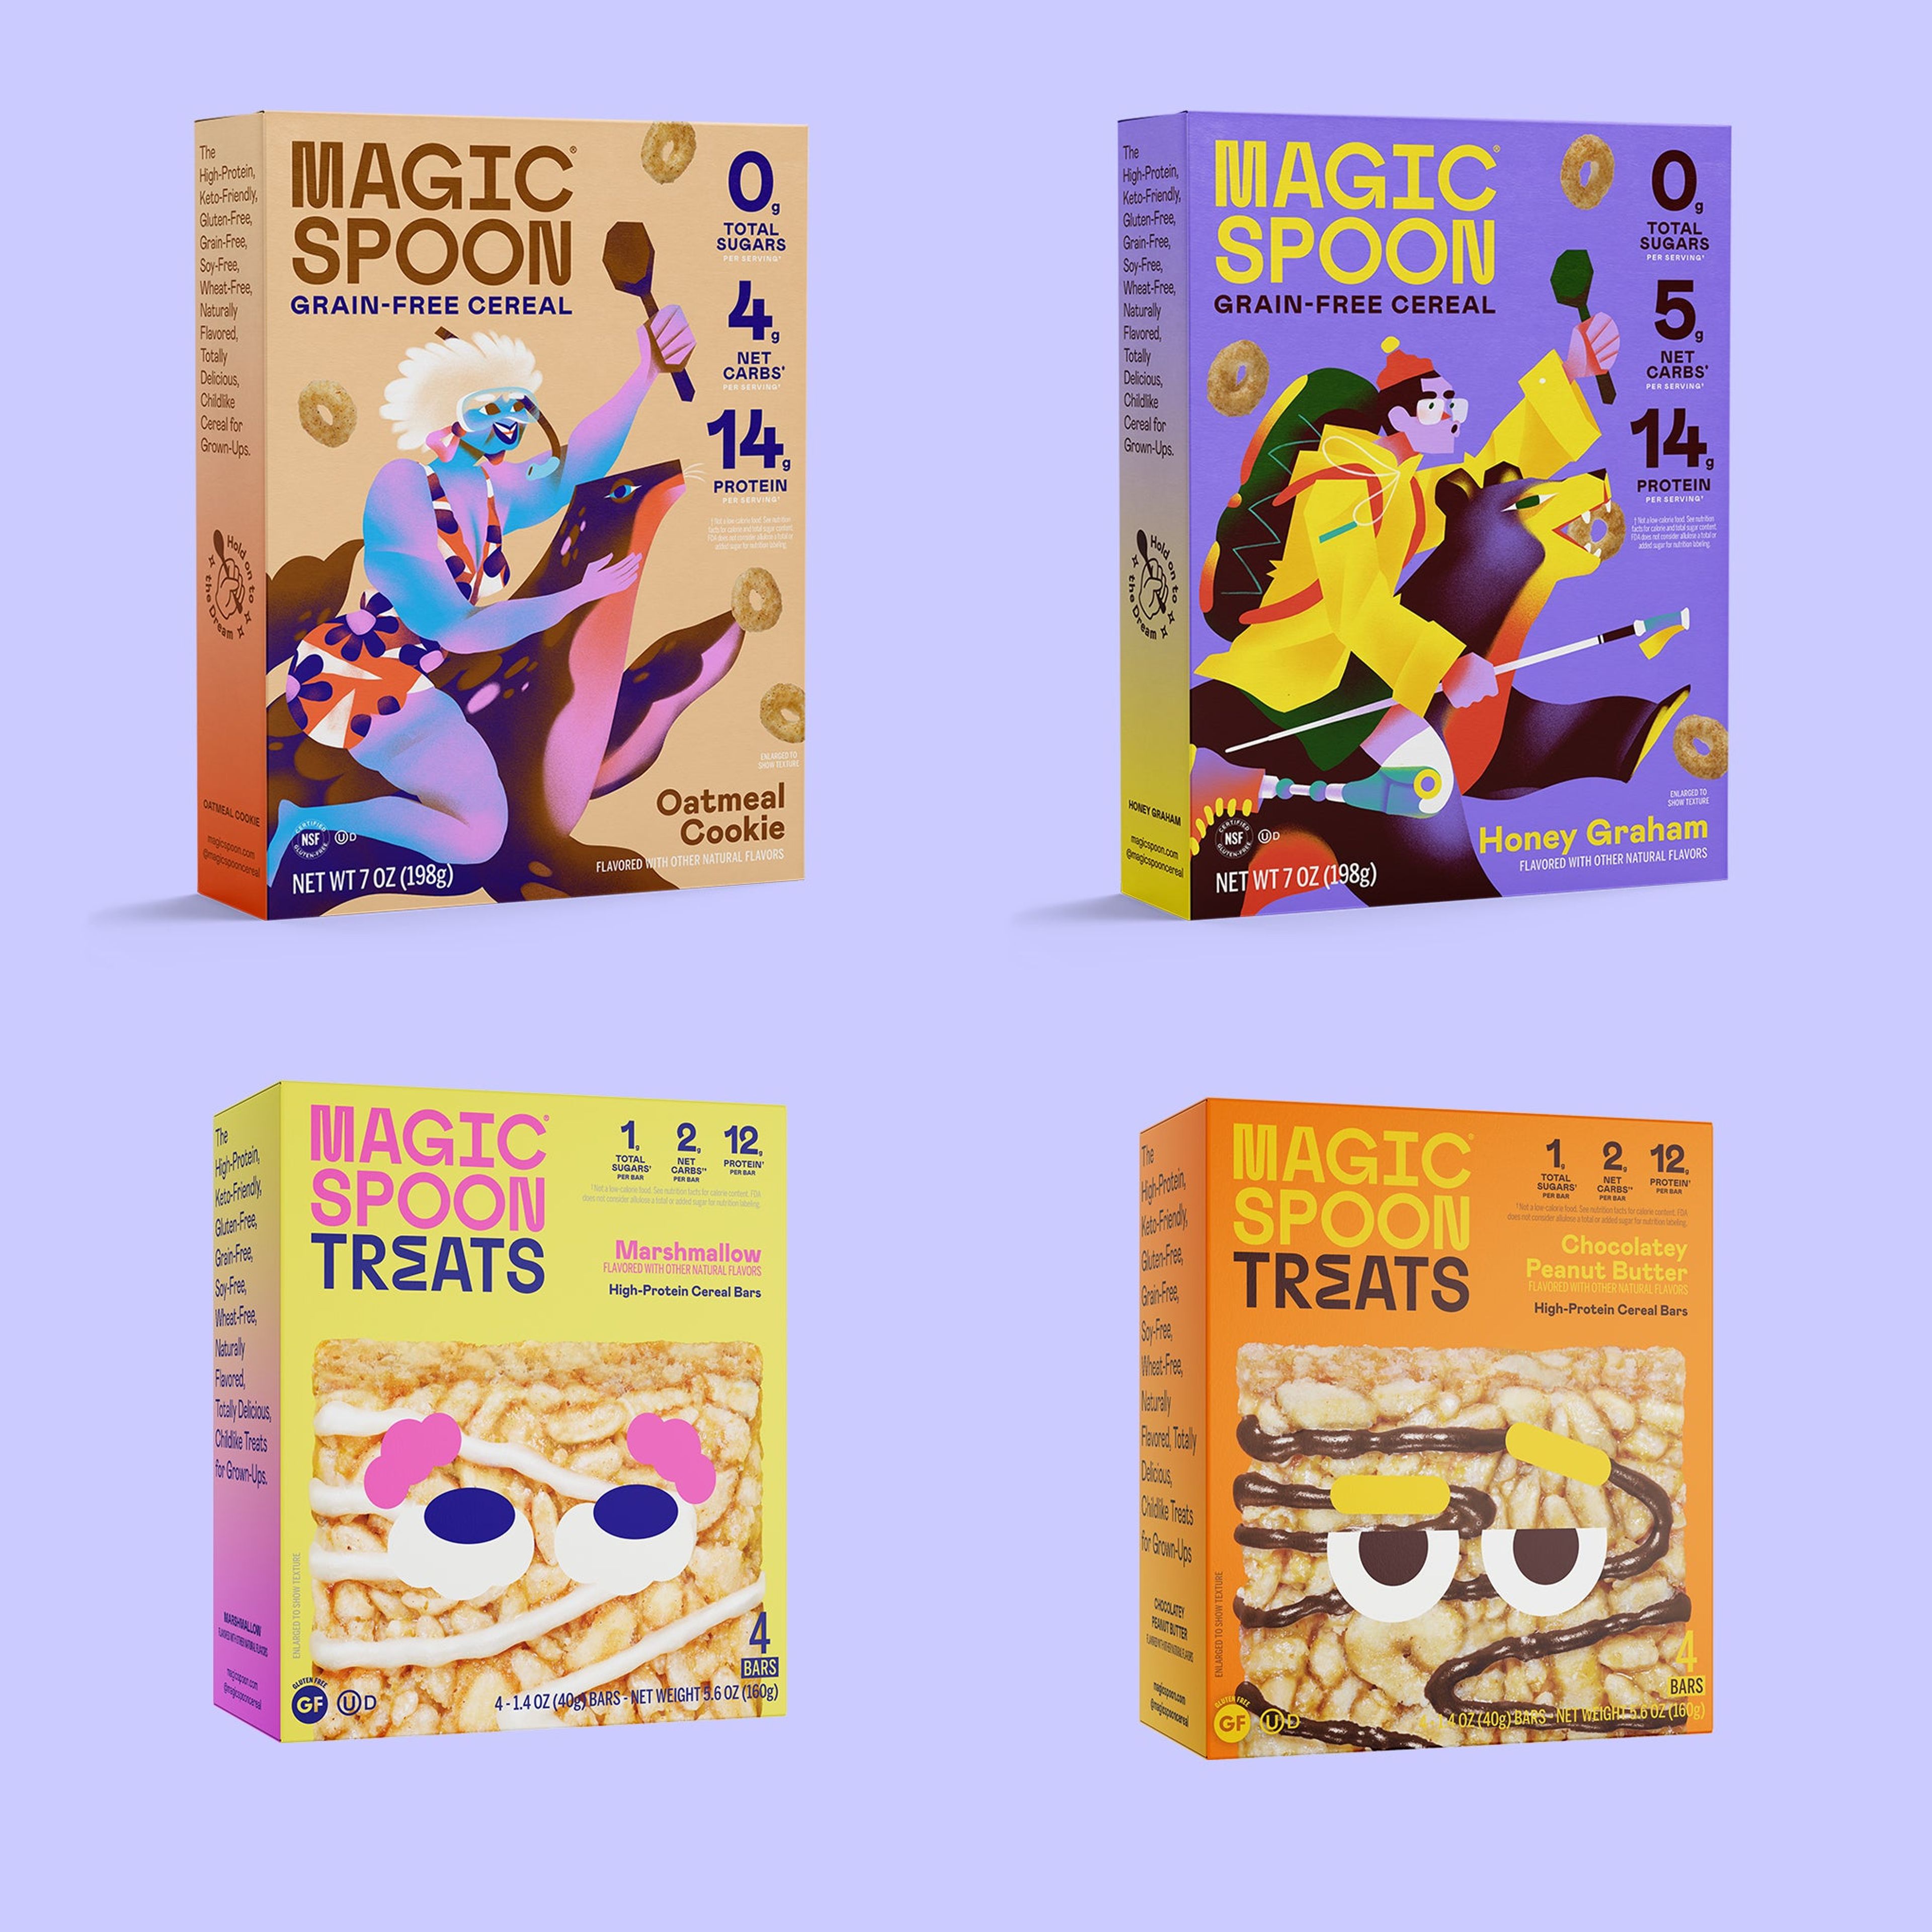 BAKERY TREATS SET - 8 cereal treats (2 boxes) + 2 boxes of cereal